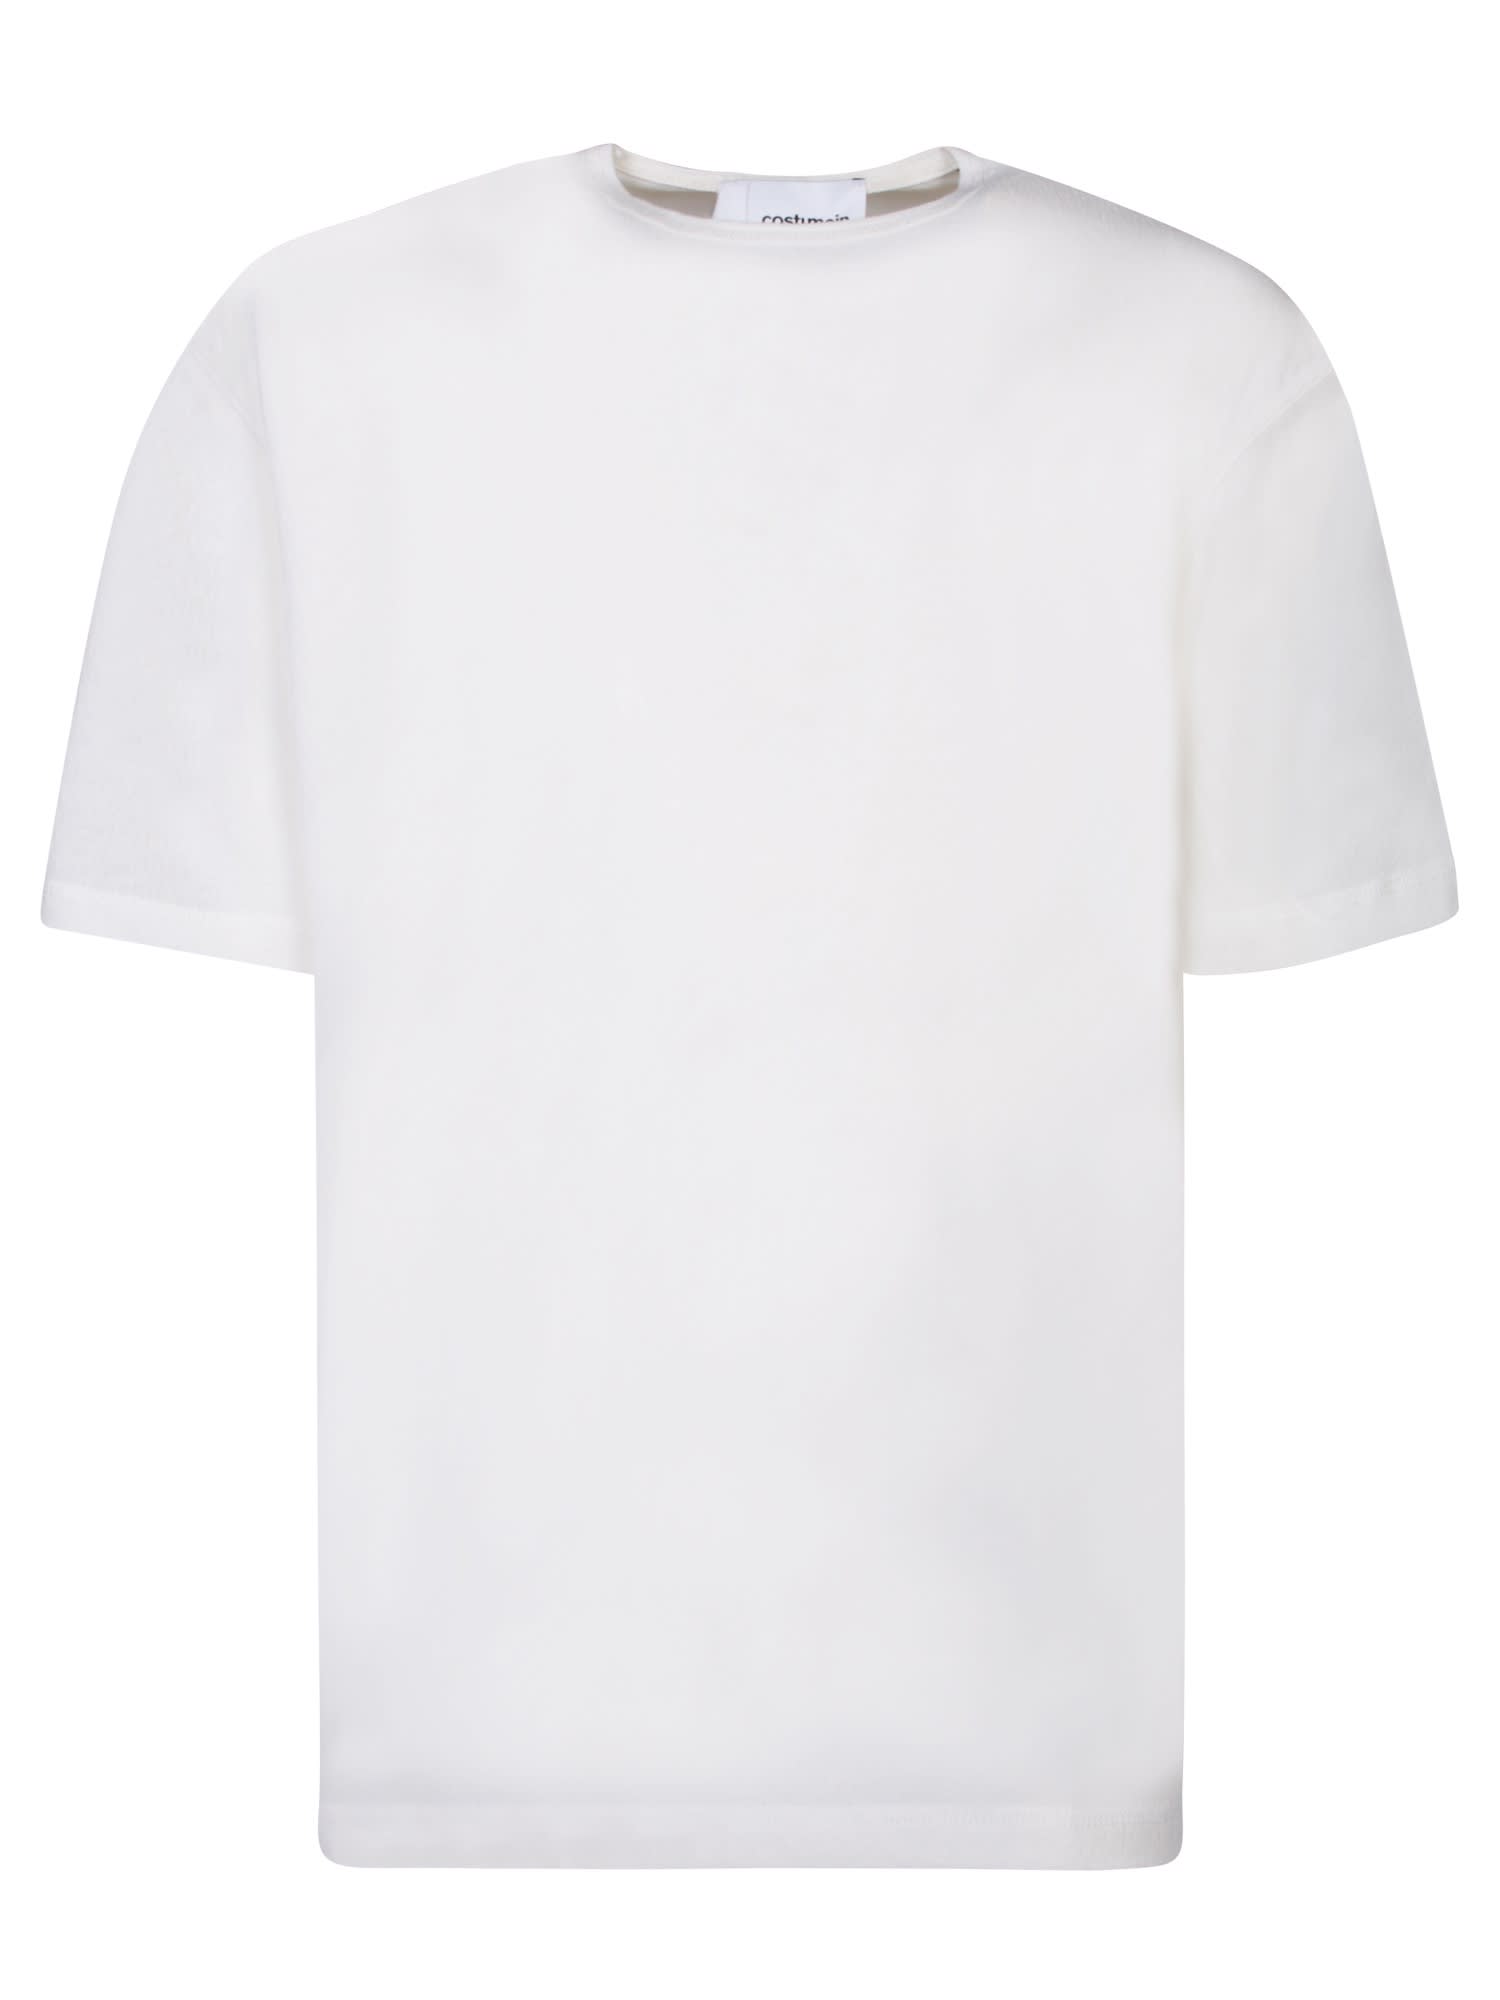 Liam White T-shirt By Costumein